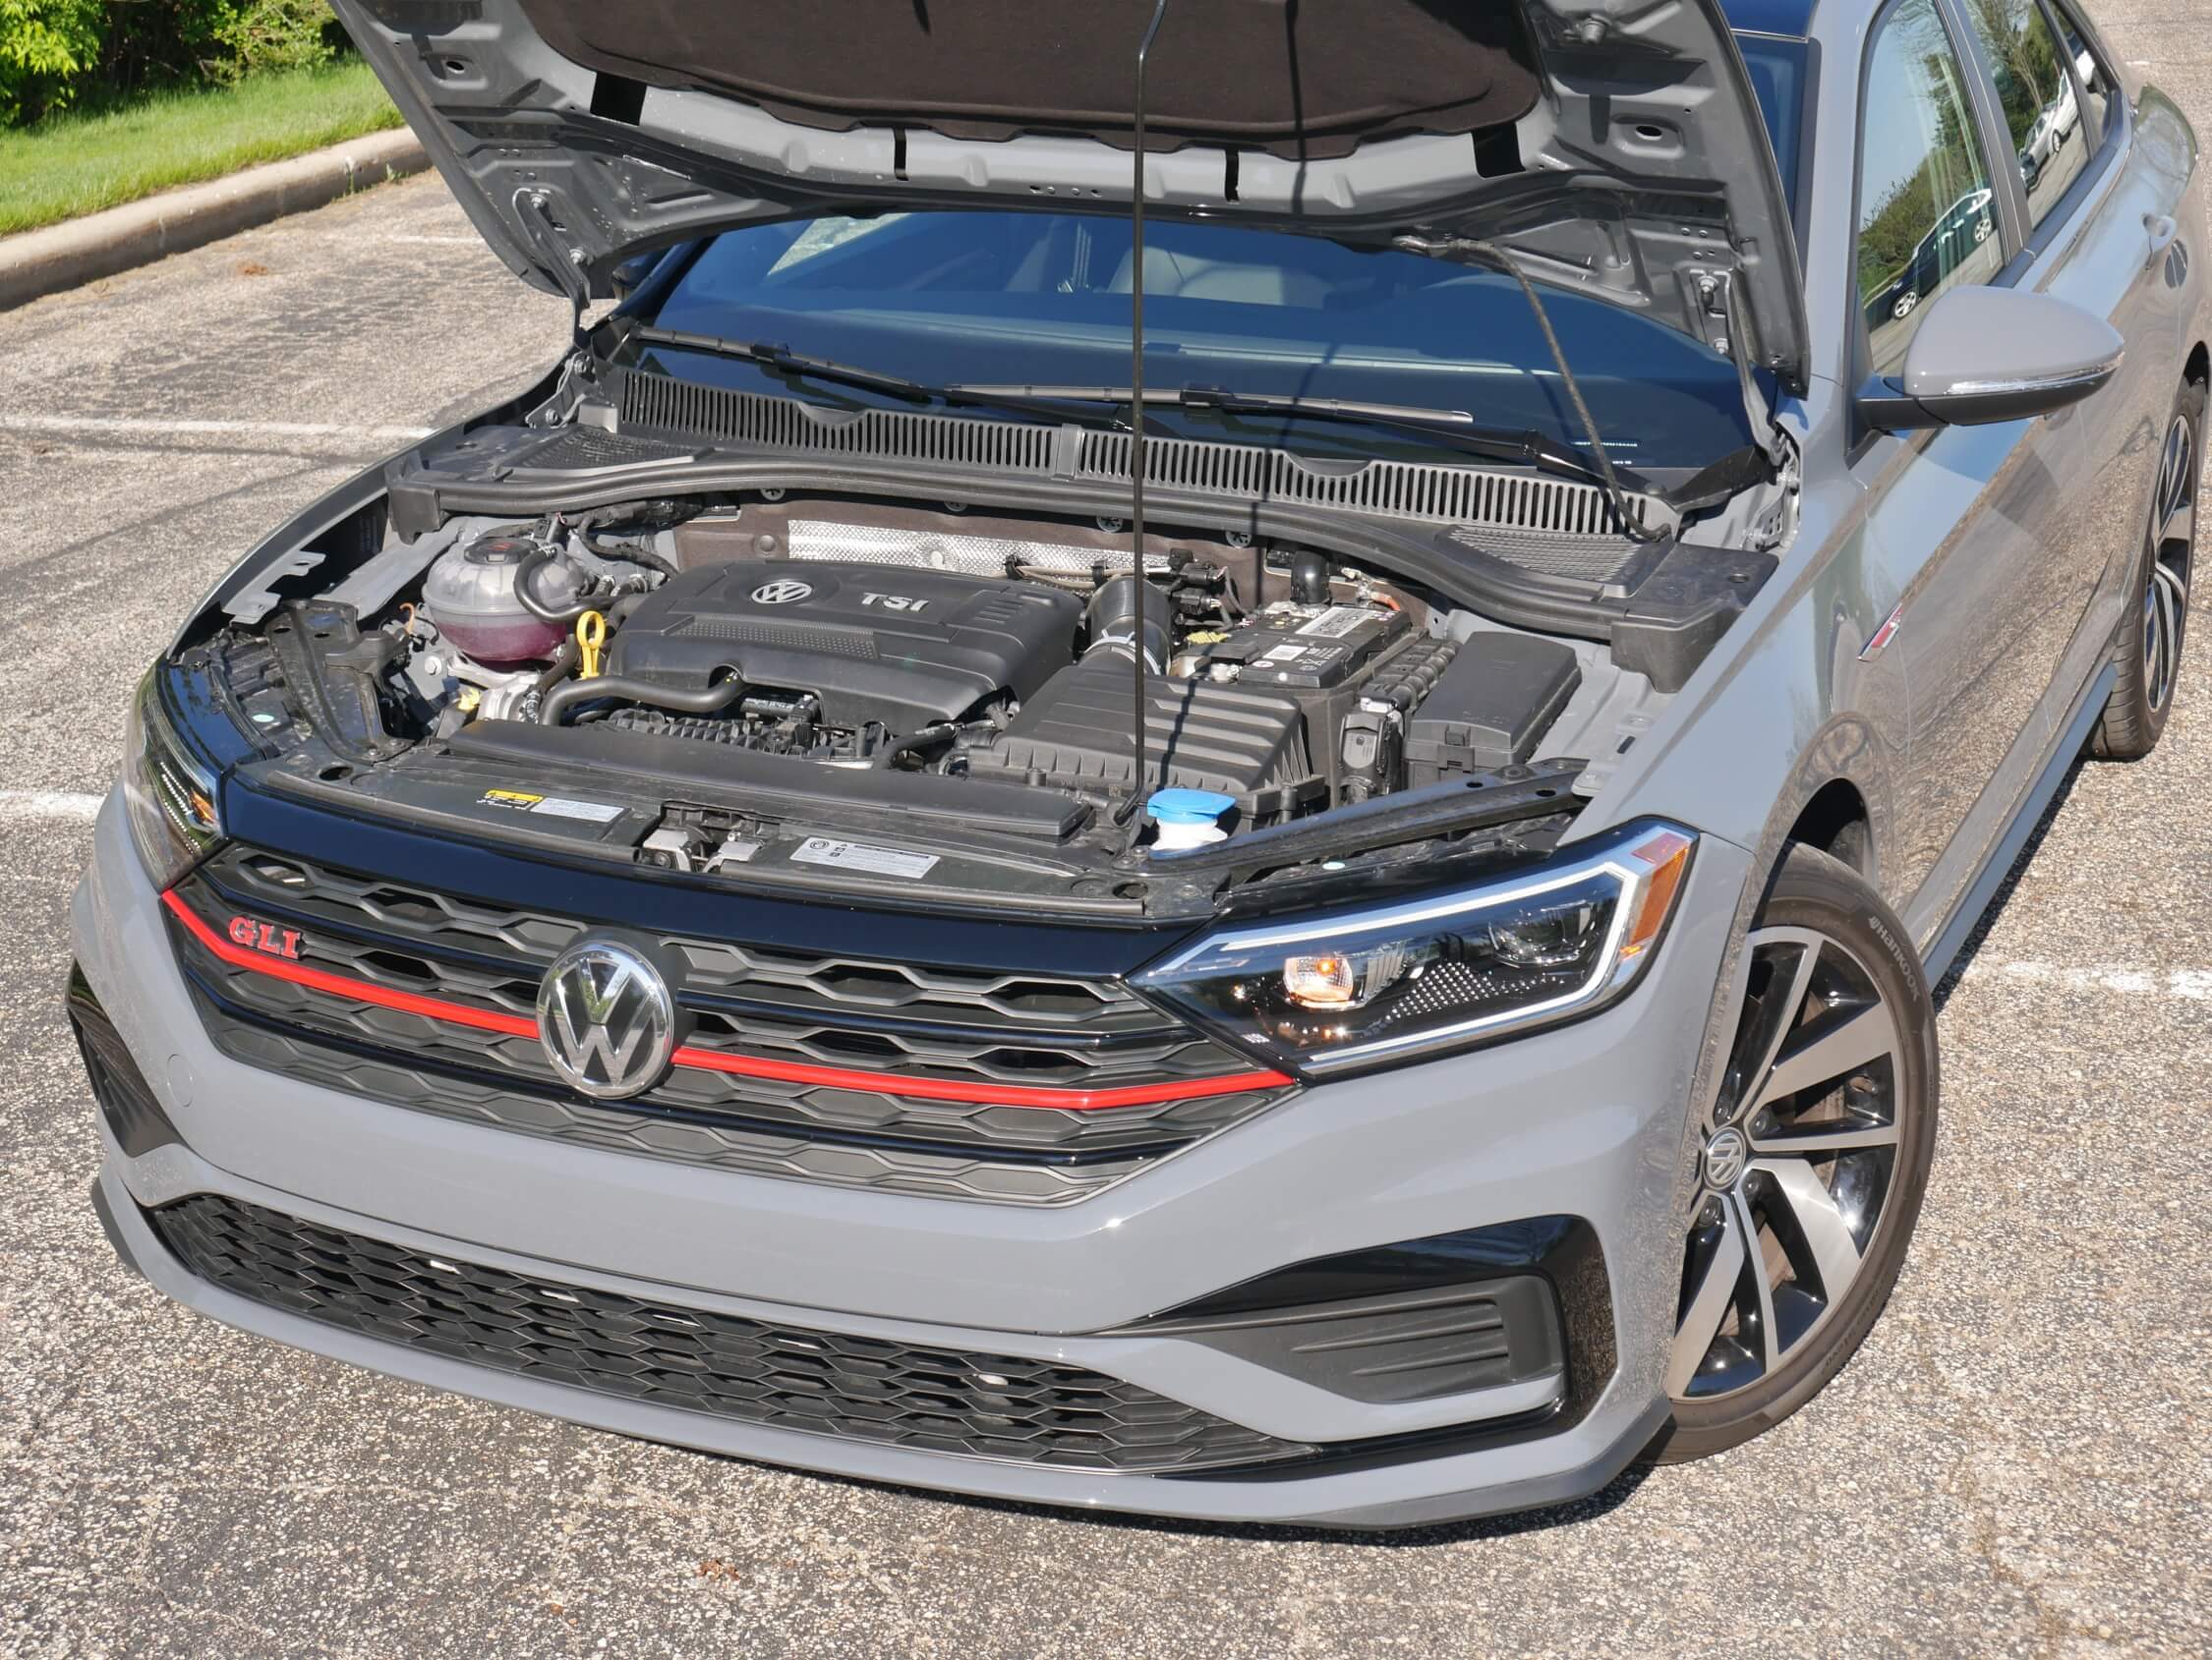 2019 Volkswagen Jetta GLI Autobahn: upgraded 228 hp, 2.0L TSI powerplant + smoother take-up 7-speed DSG dual clutch automated manual transaxle + wet clutch front limited slip = sub 6 sec. 0-60, 31 combined mpg